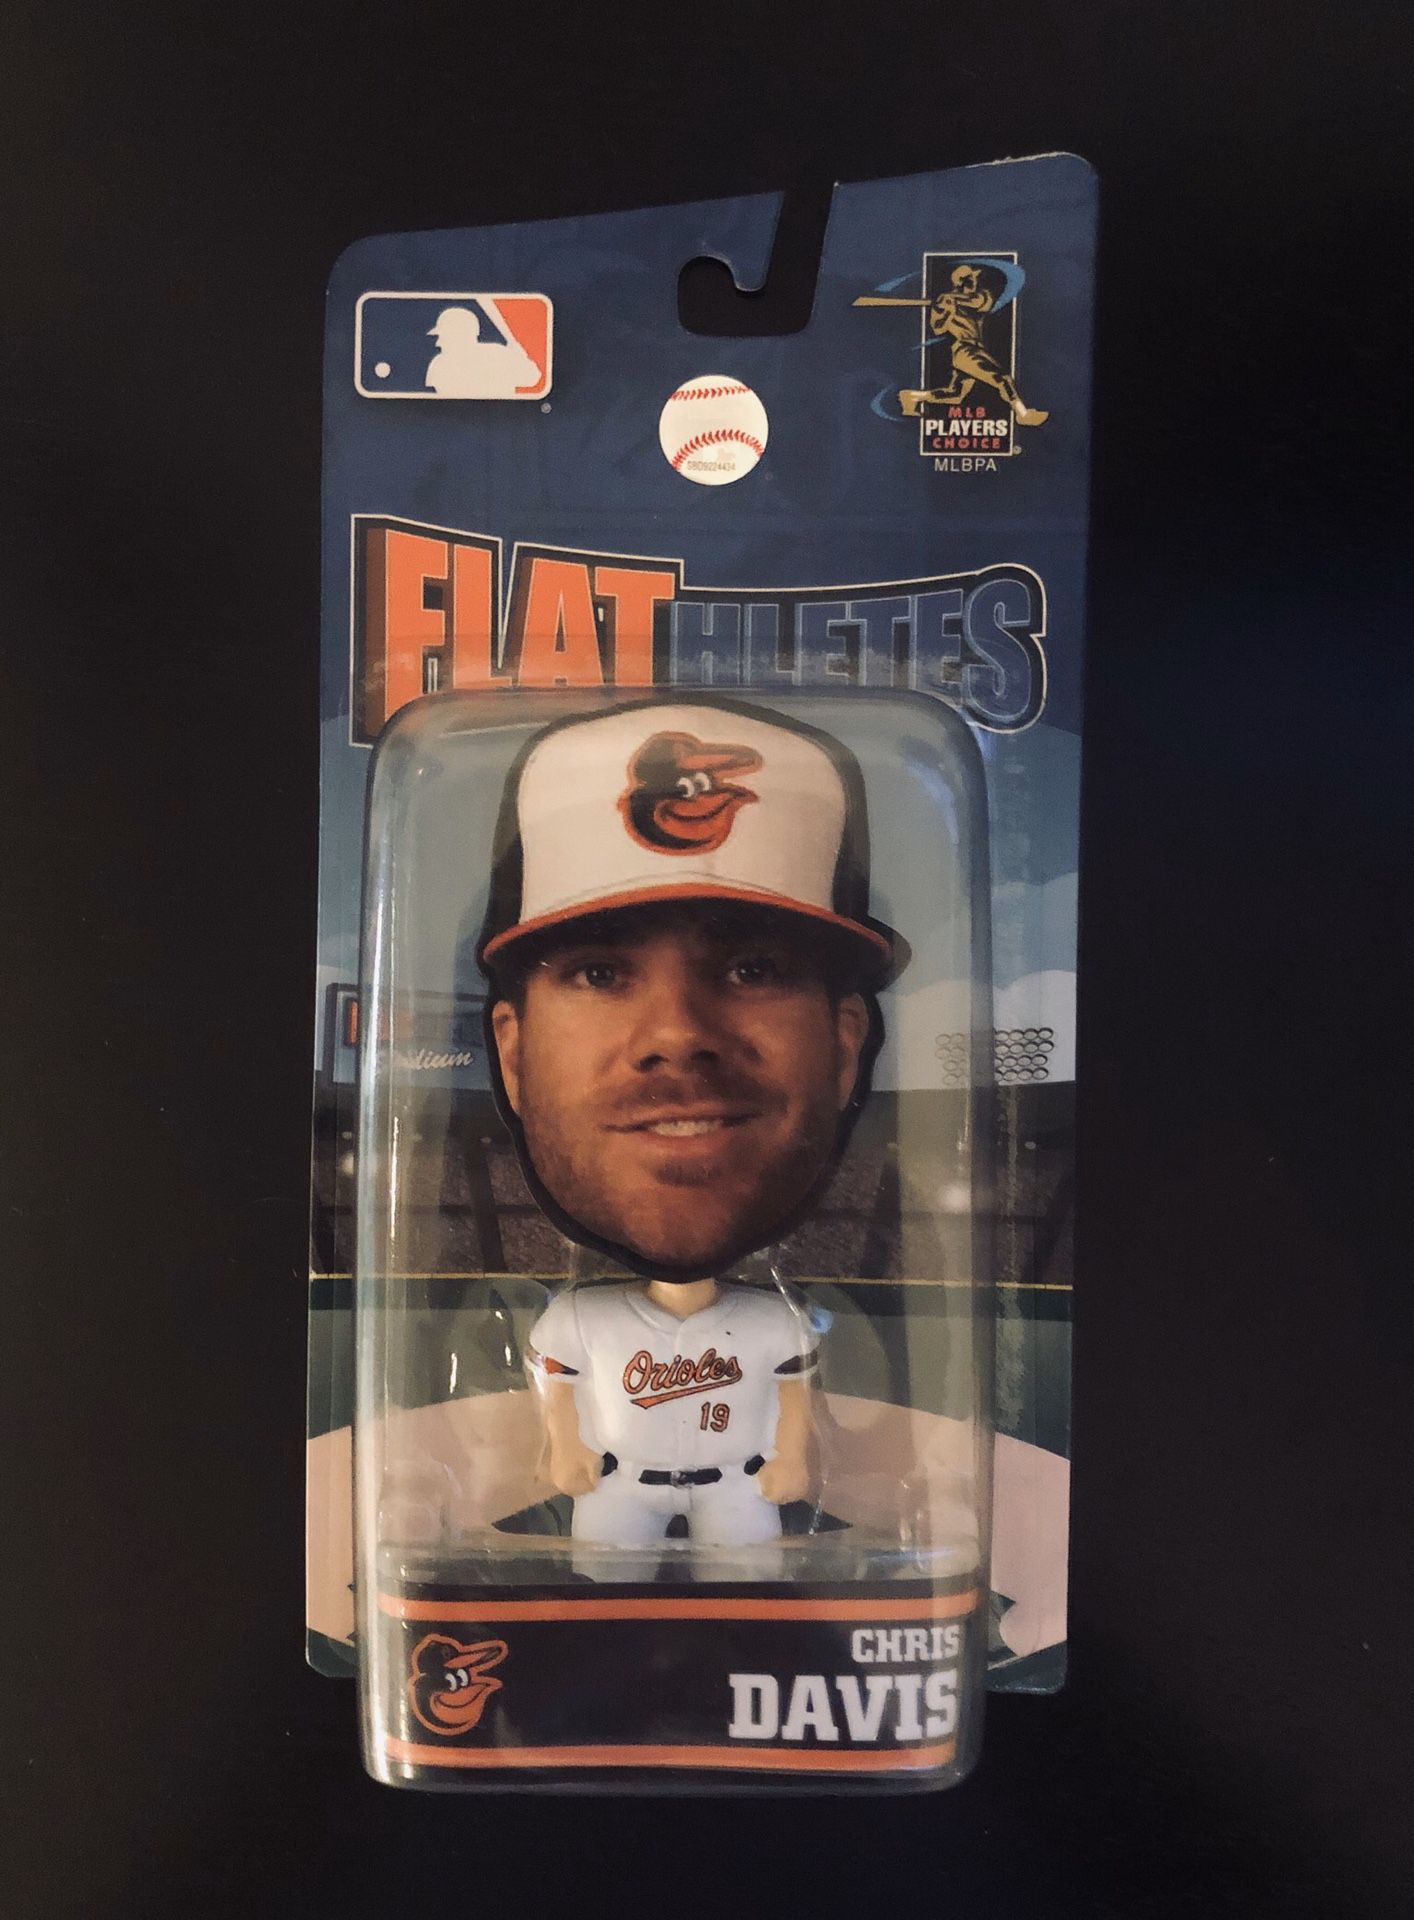 Chris Davis Baltimore Orioles MLB Baseball Flathletes 5” Action Figure Toy Forever Collectibles - BRAND NEW!